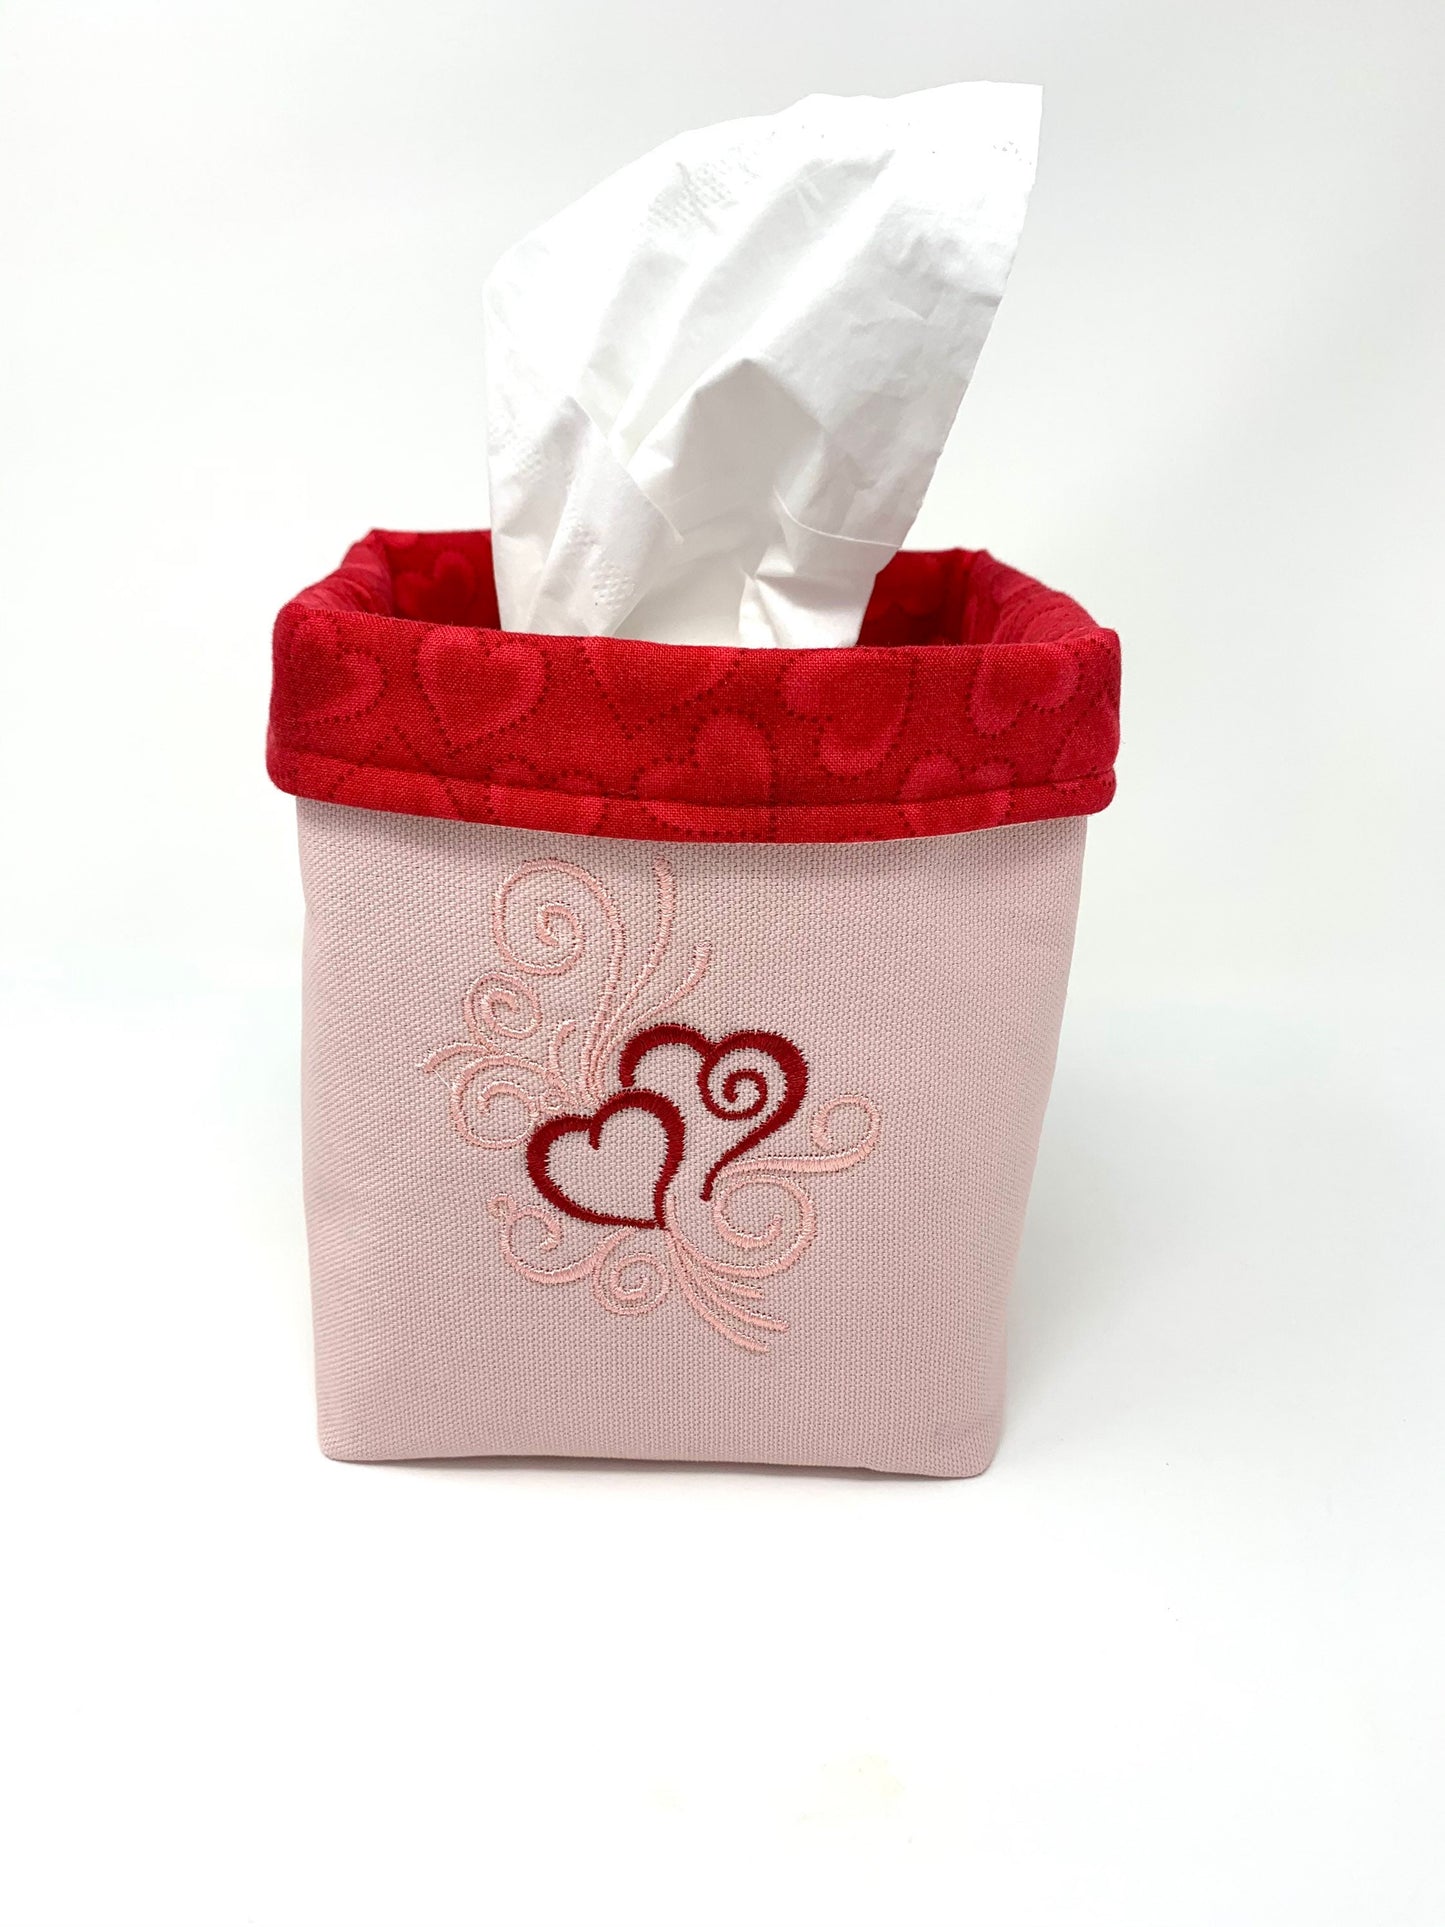 Fabric Bag, Basket, Reusable, Tissue Box Holder, Hearts, Valentines Day, Red, Pink, Handmade